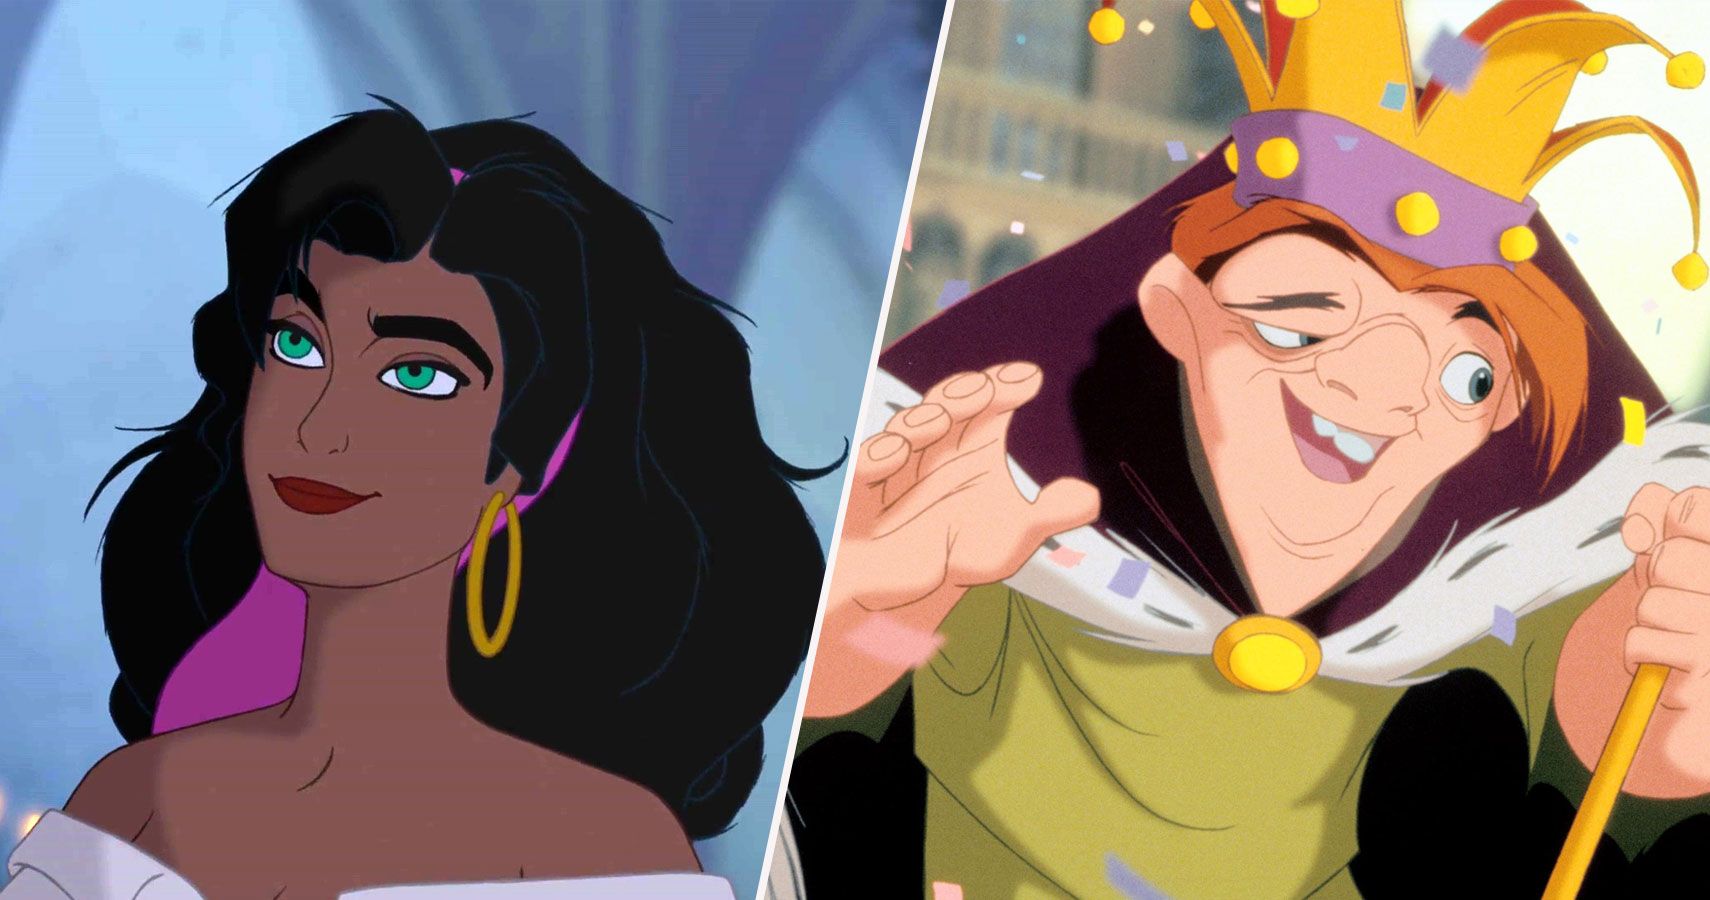 The Hunchback Of Notre Dame Was Dark, But Disney's Message Is Important